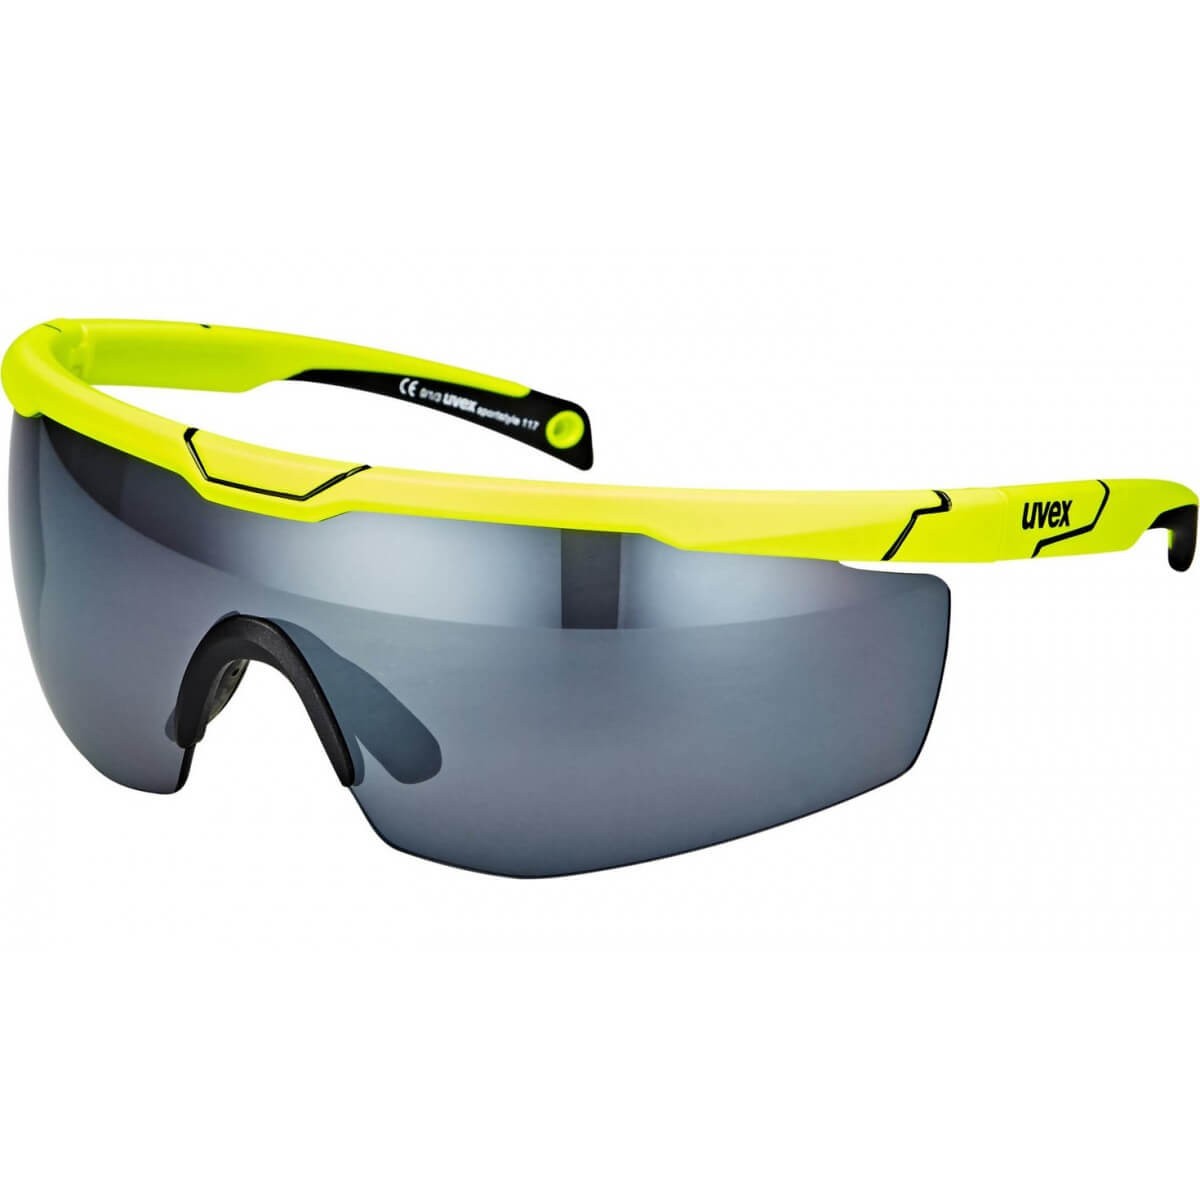 Image of Uvex Sportstyle 117 gelbe Sonnenbrille